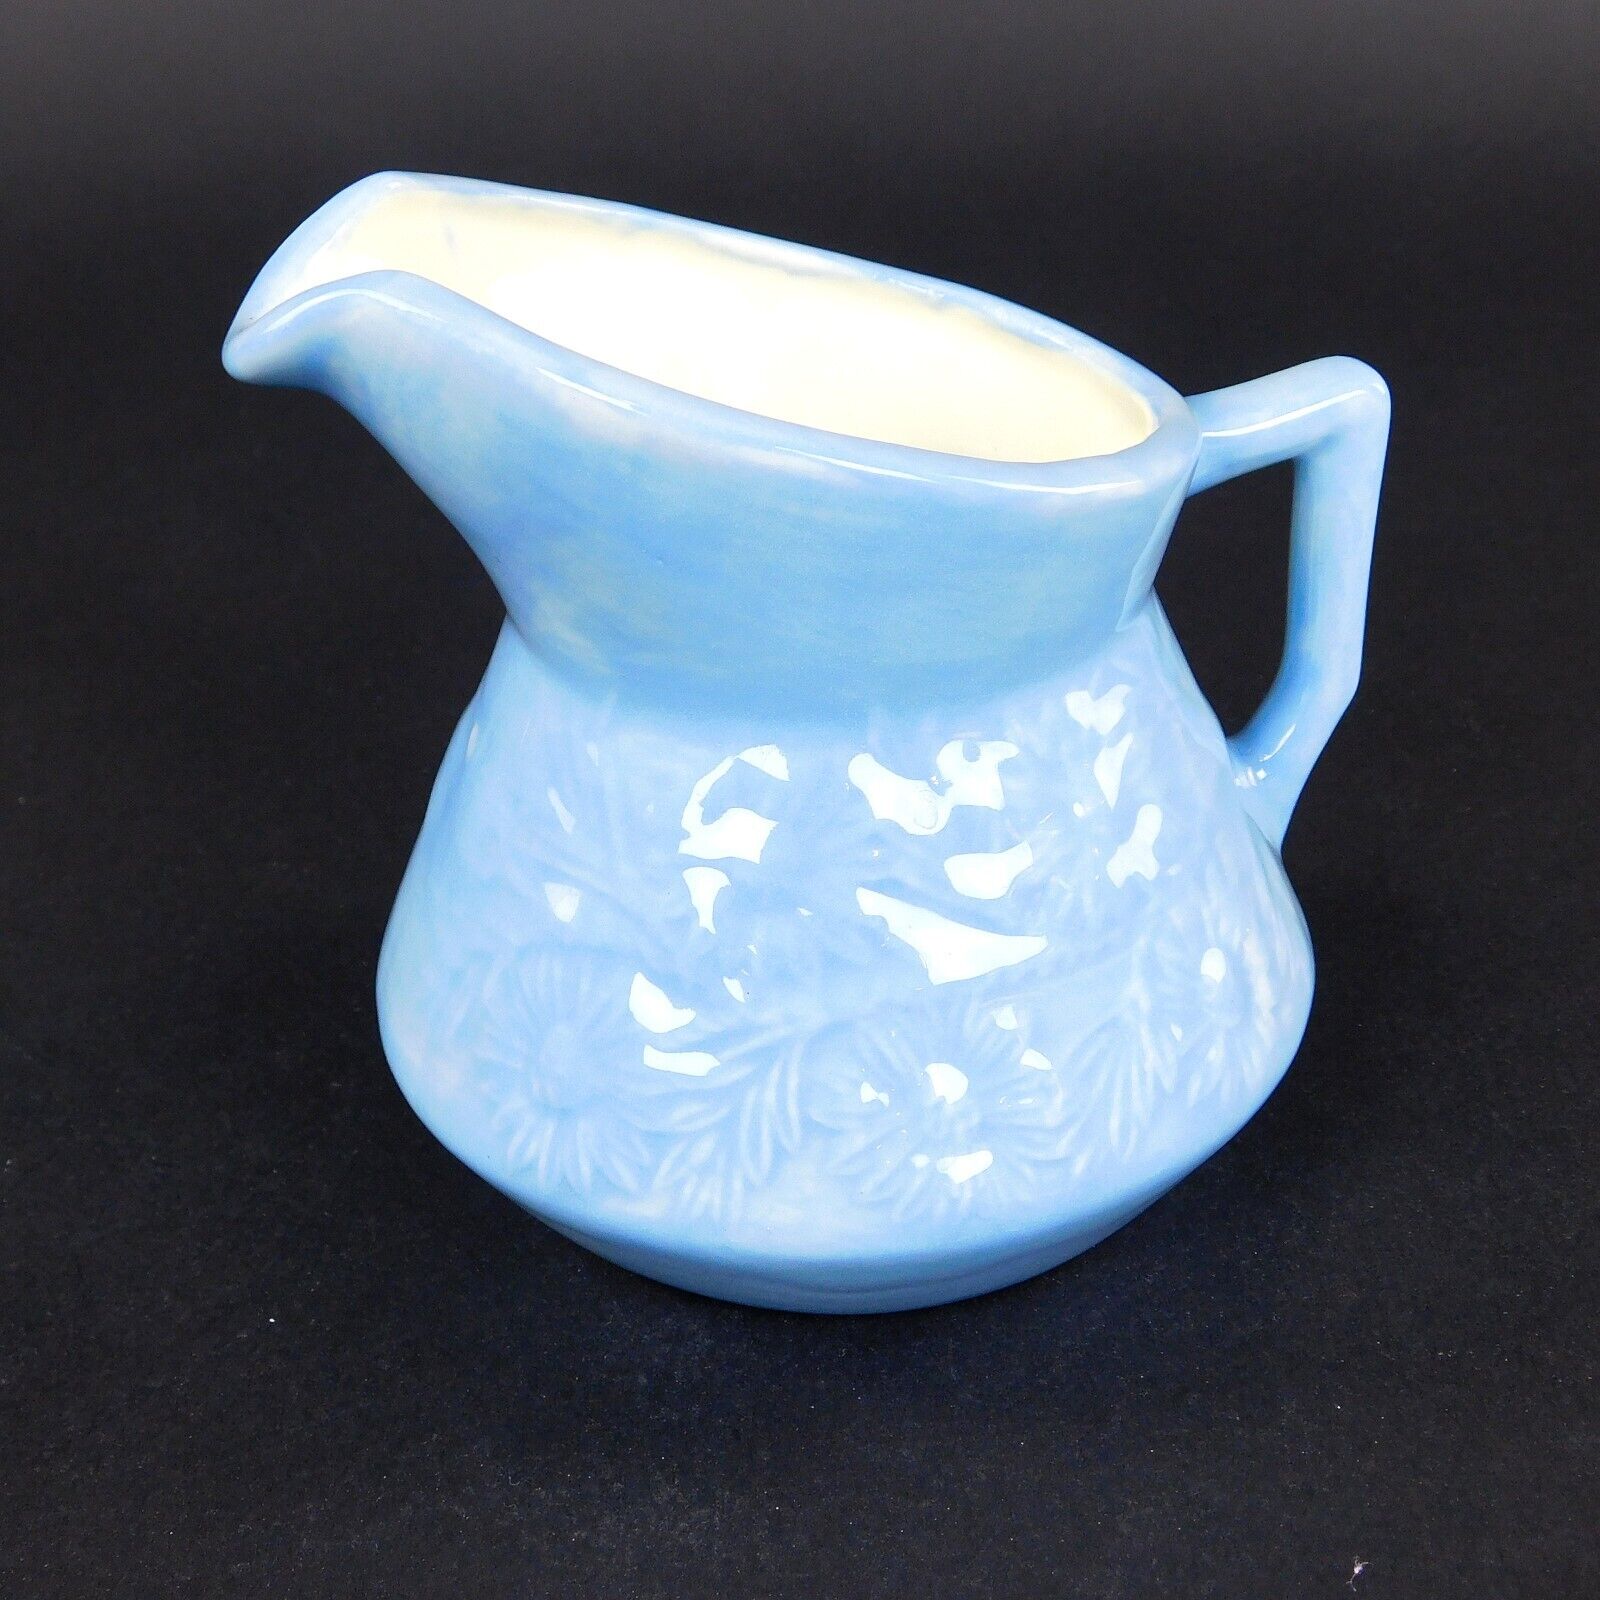 Vintage ceramic Pitcher 1 Pint Light Blue Raised Daisies 1971 Signed By Bea 1971